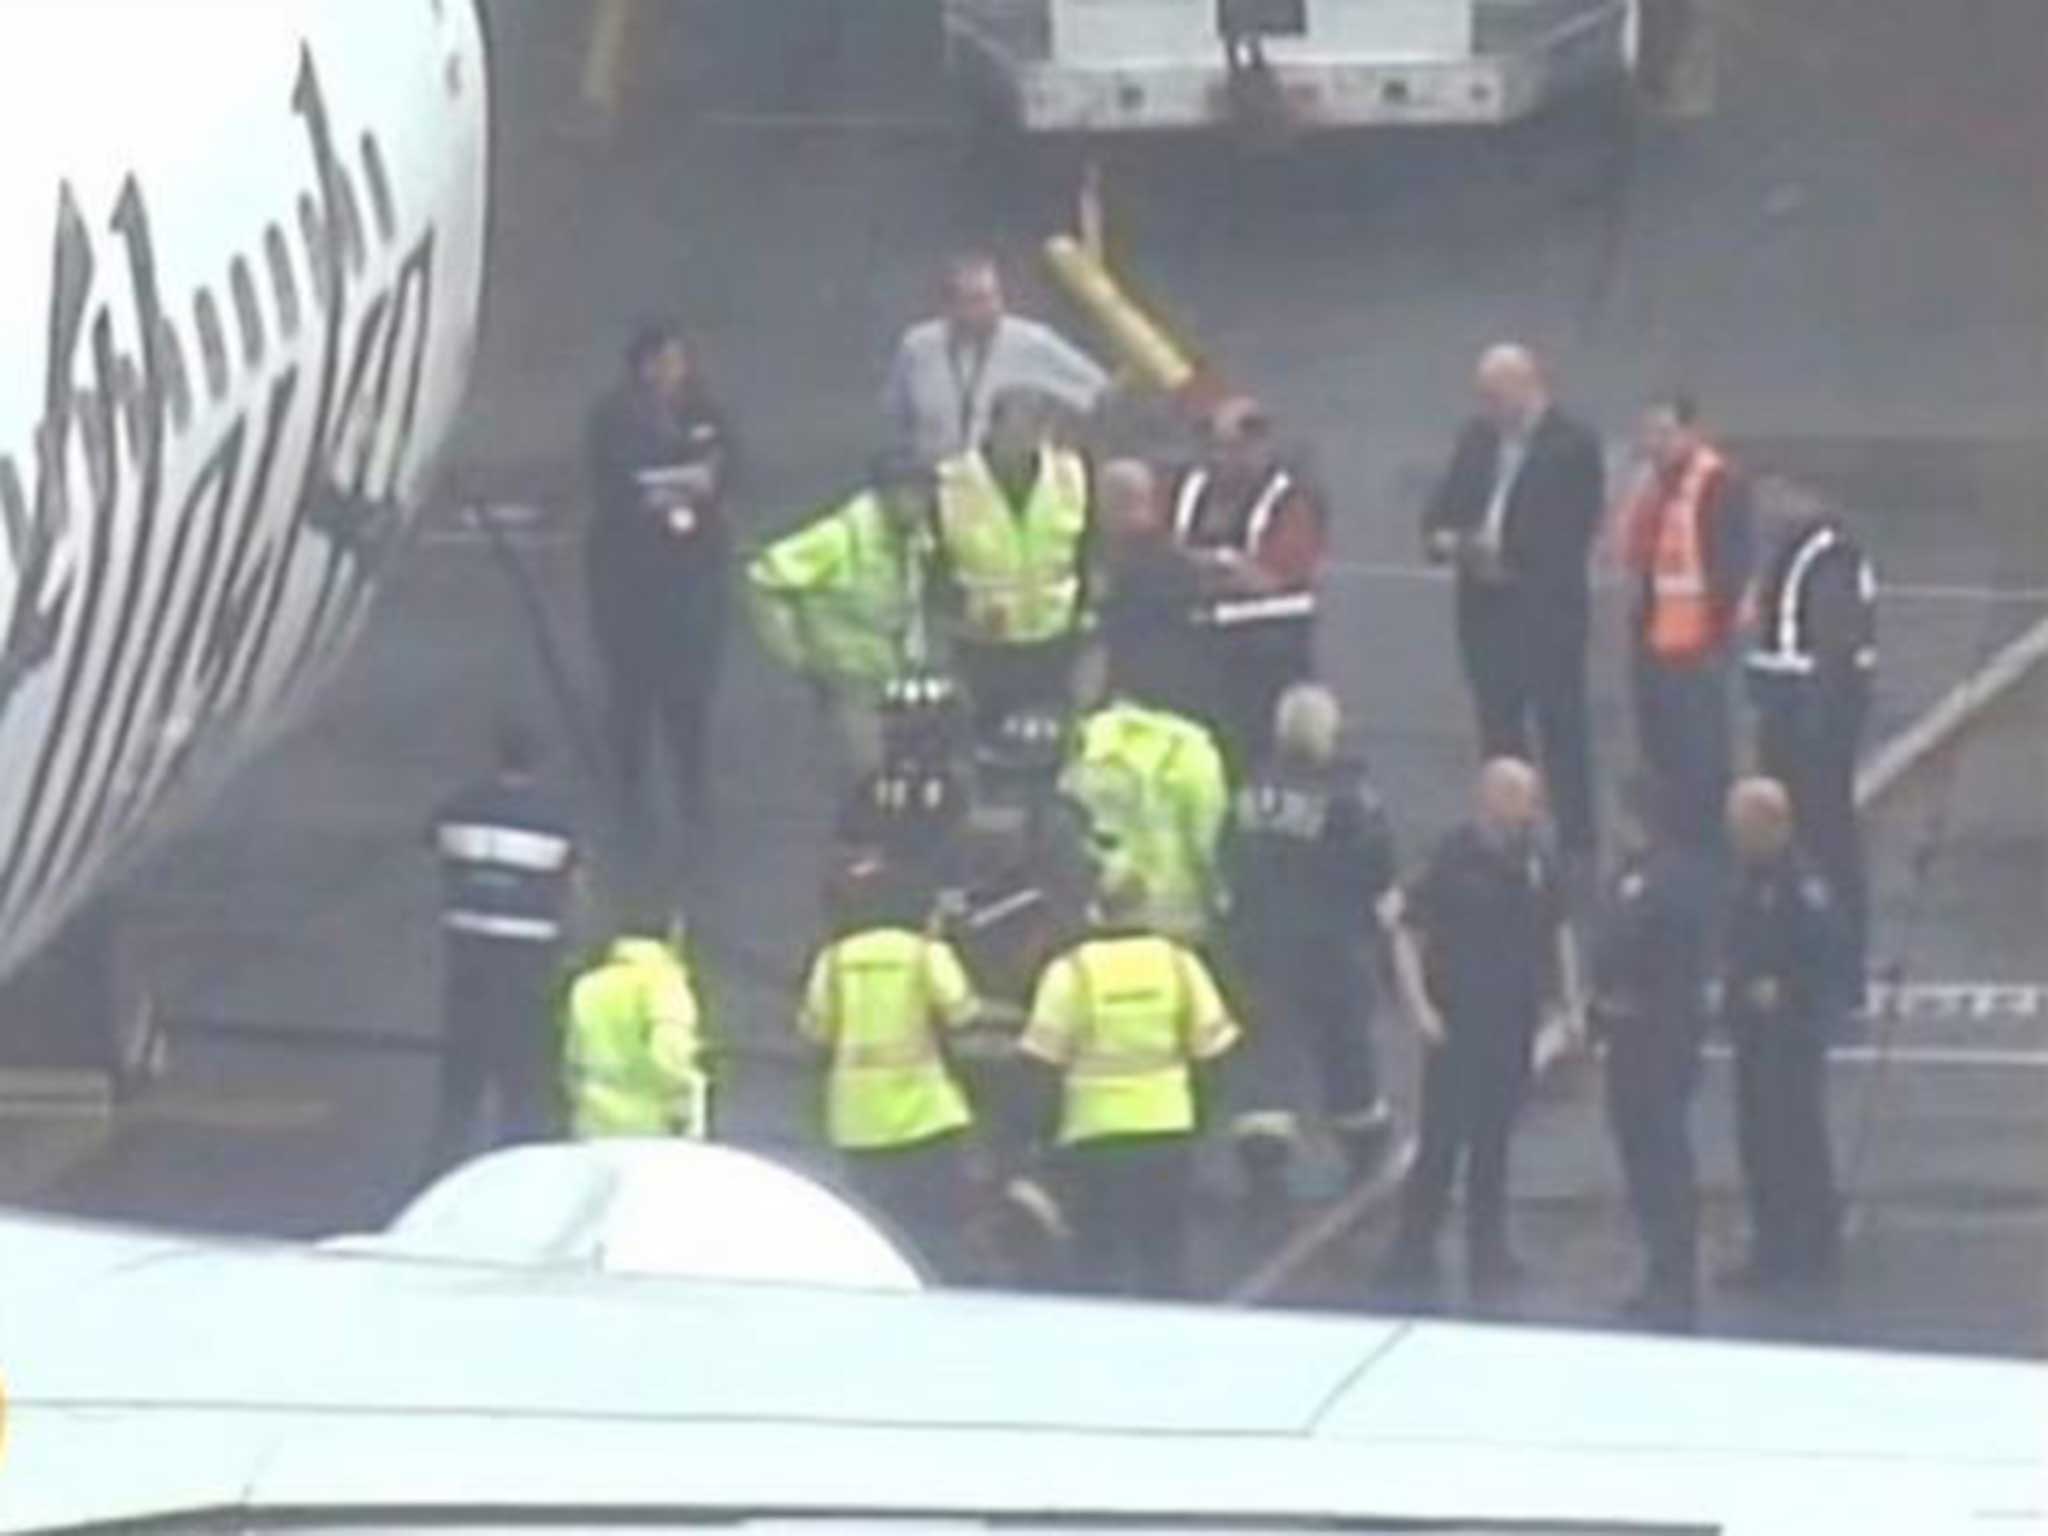 The worker is retrieved from the plane's hold